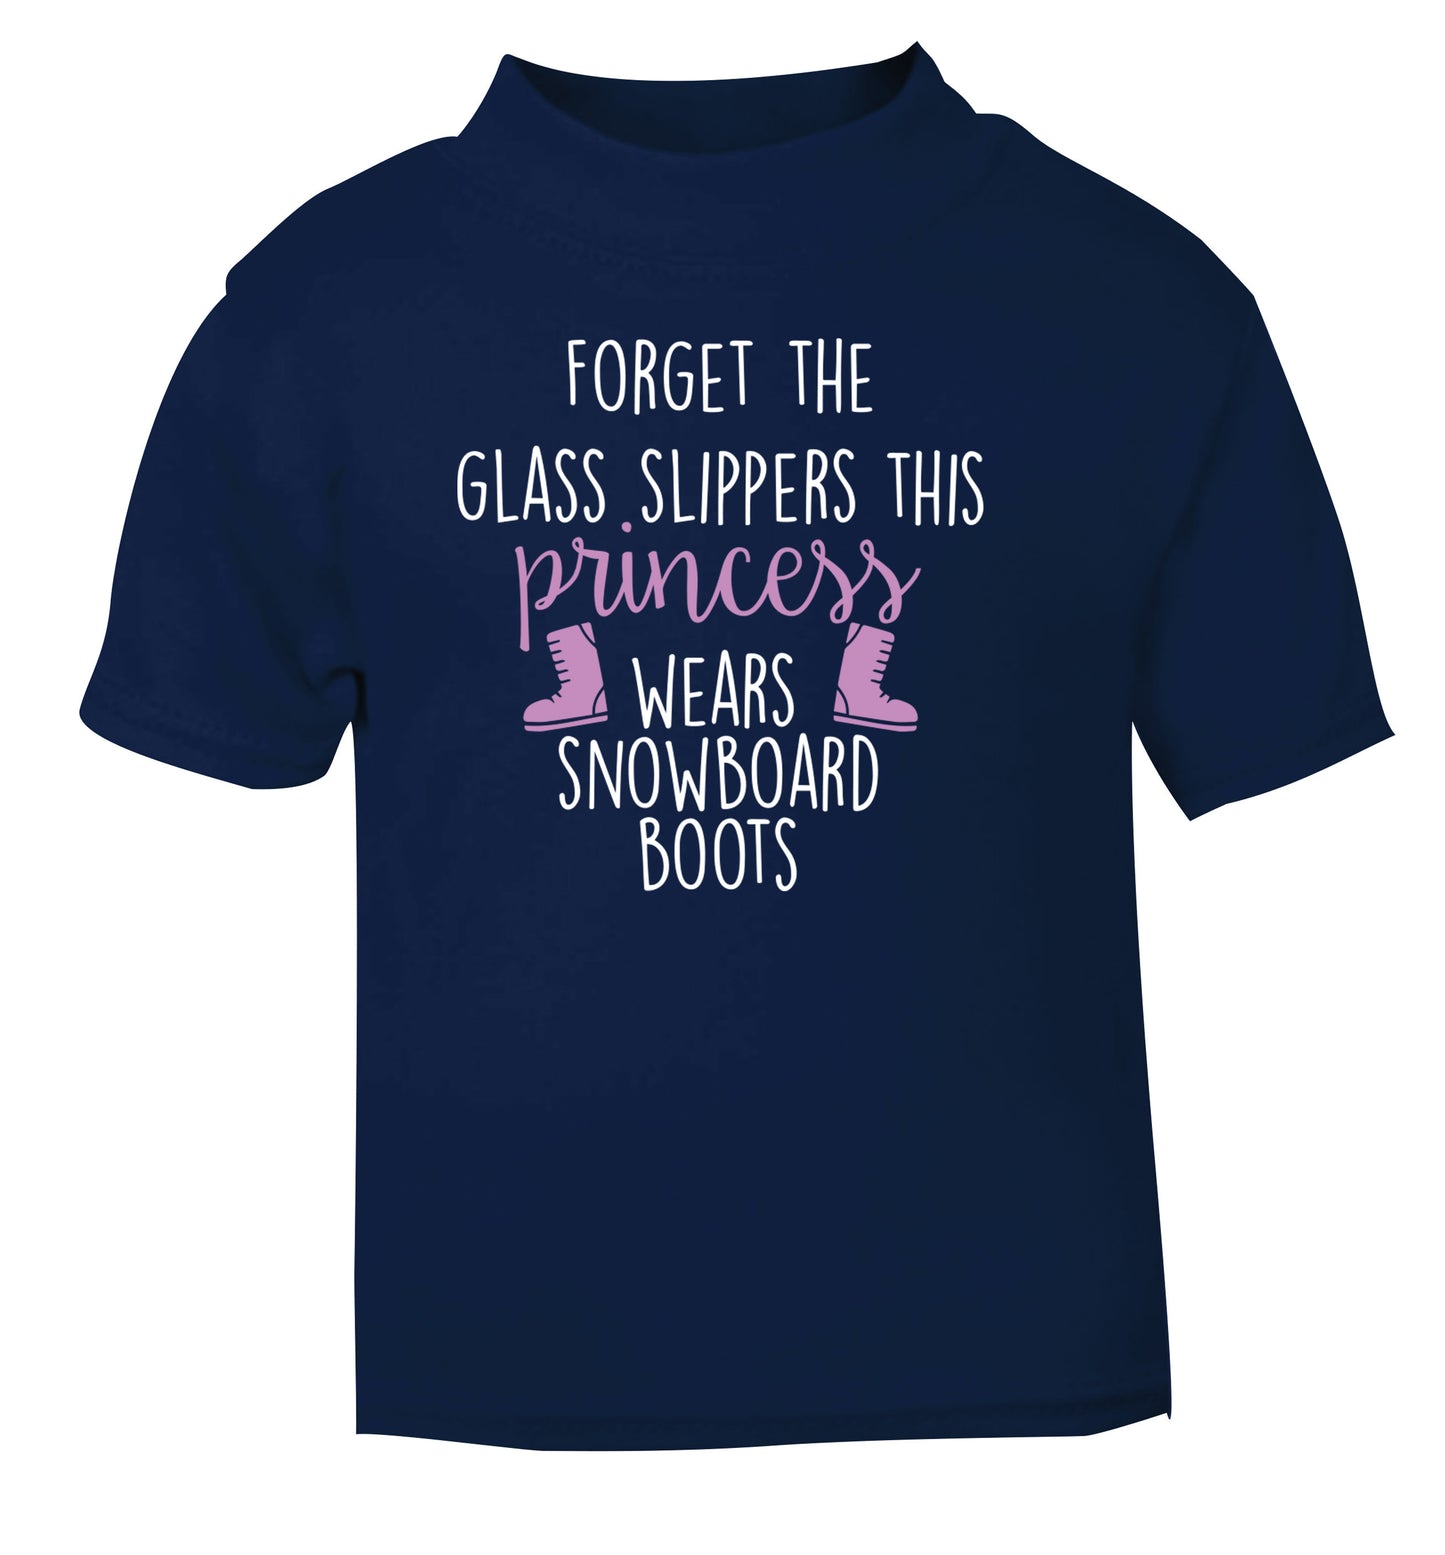 Forget the glass slippers this princess wears snowboard boots navy Baby Toddler Tshirt 2 Years